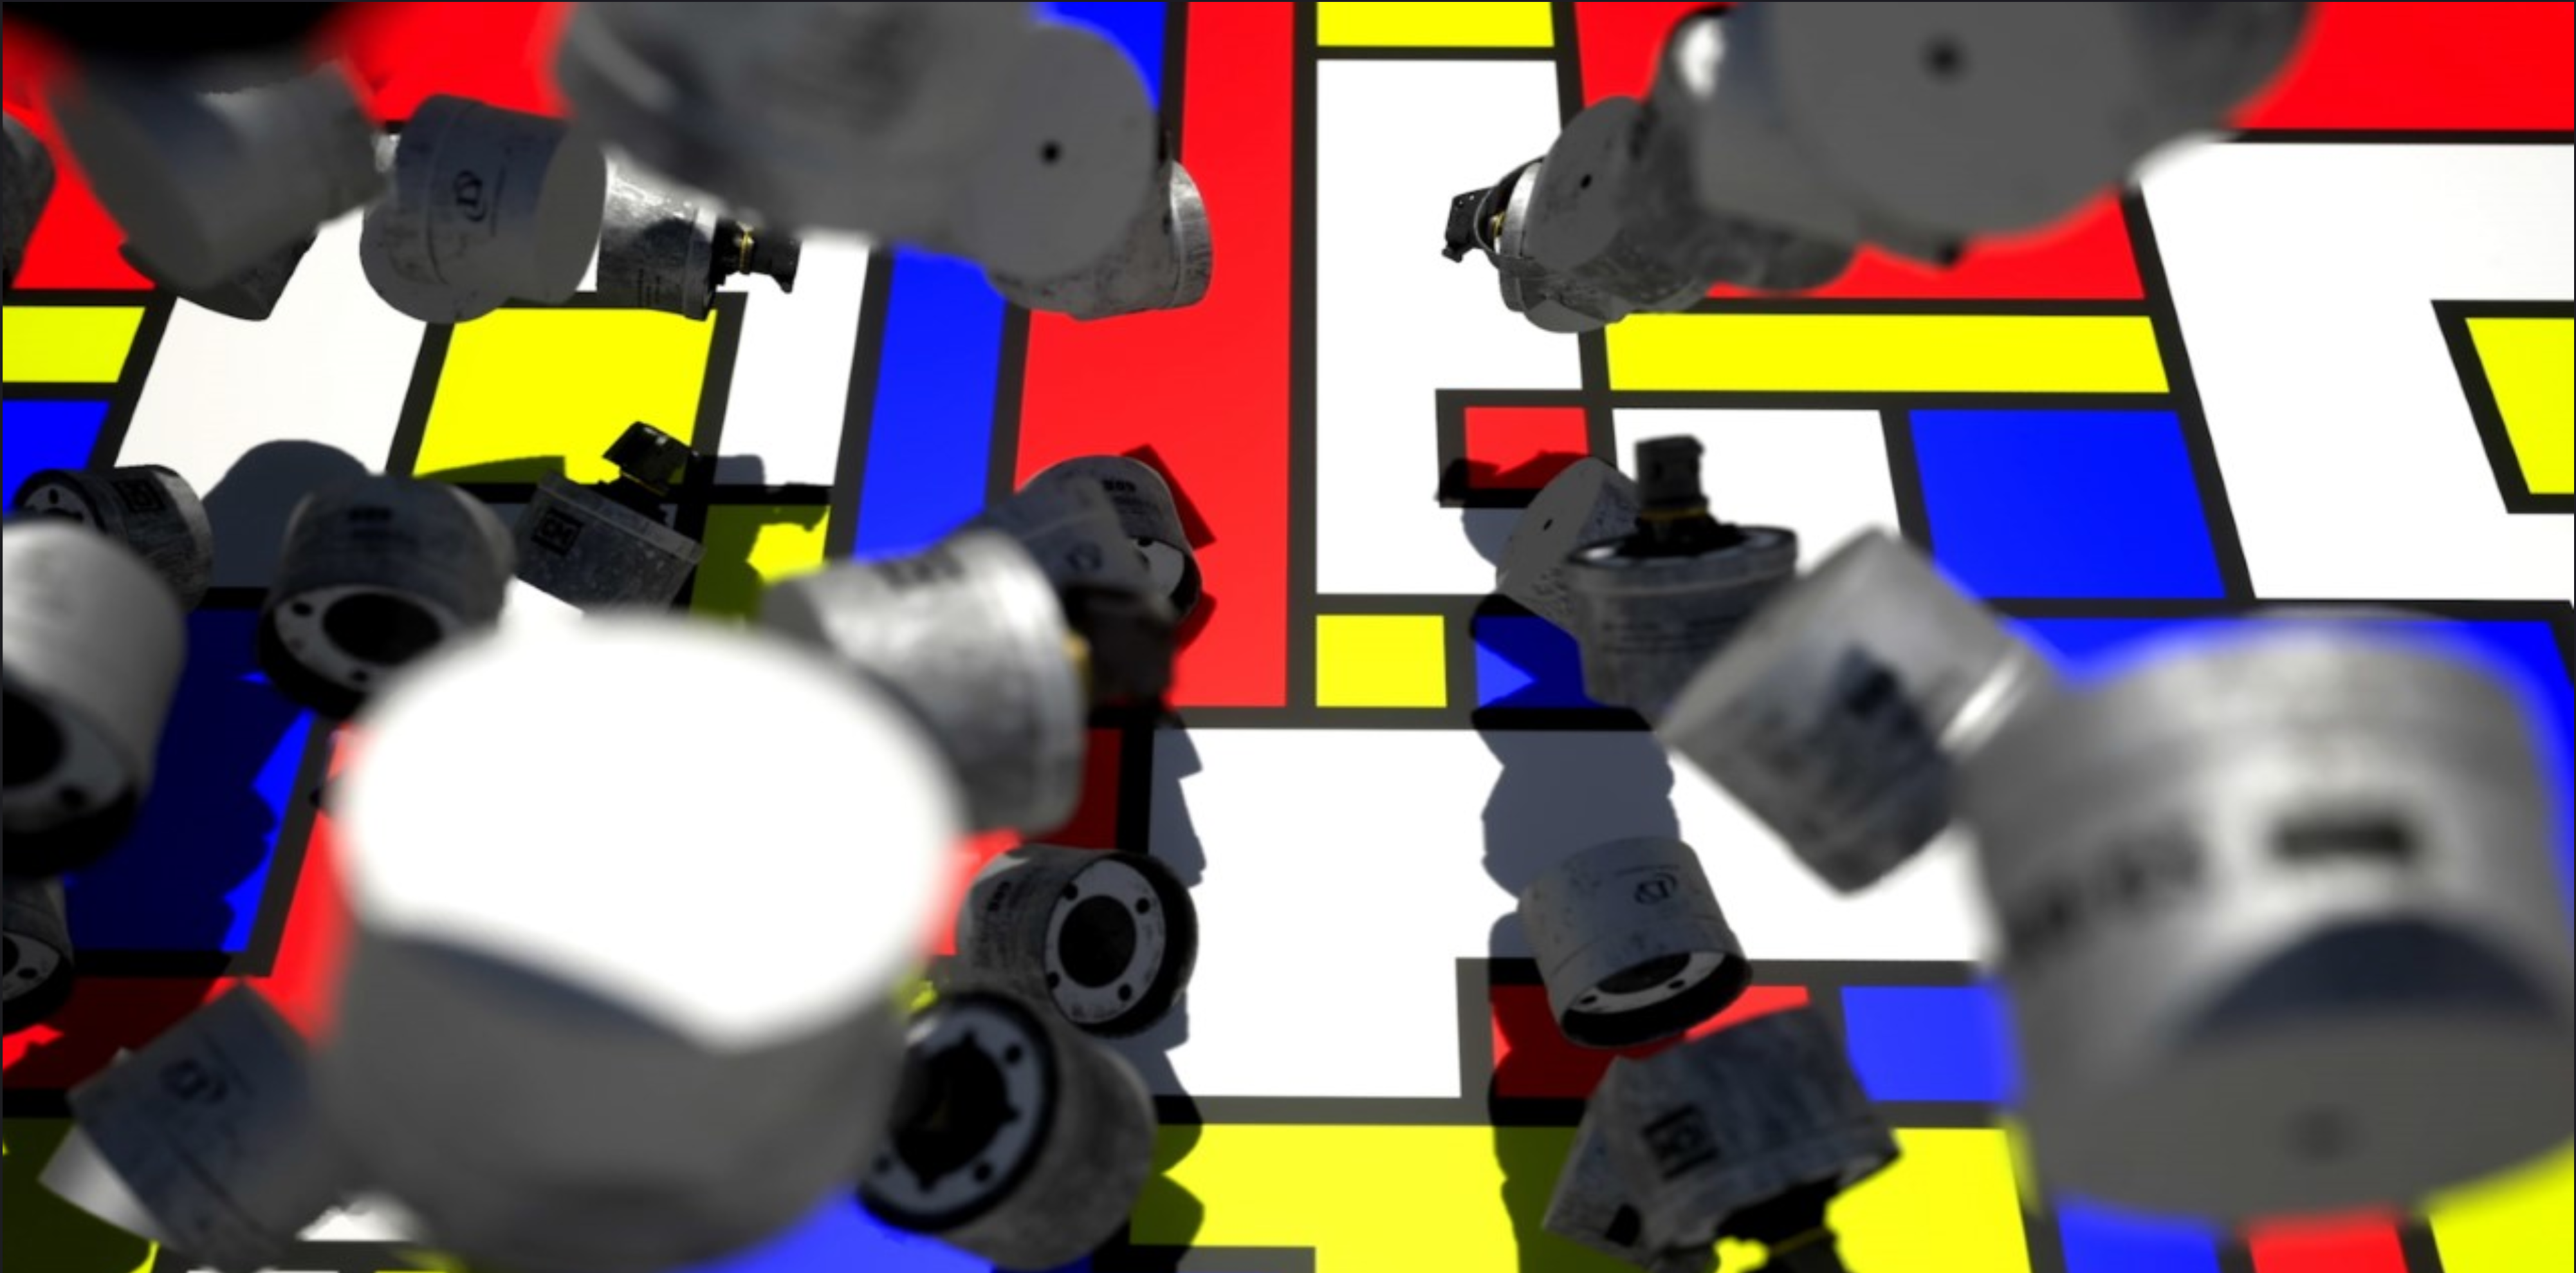 Background is composed of a series of a graphic, grid-like patterns of geometric shapes (squares and rectangles) in primary colors of blue, red and yellow, plus black and white, similar to a Mondrian painting in style. Overlayed in black, white and shades of grey are a series of synthetically-generated images of exploded tear gas grenade canisters used to disburse immigrants at the US/Mexican border in November 2018.   When US border agents fired tear gas grenades at civilians in November 2018, photographs showed that many of those grenades were manufactured by the Safariland Group, one of the world’s major manufacturers of so-called ‘less-lethal munitions’. The Safariland Group is owned by Warren B. Kanders, the vice chair of the board of trustees of the Whitney Museum of American Art.  Whereas the export of military equipment from the US is a matter of public record, the sale and export of tear gas is not. As a result, it is only when images of tear gas canisters appear online that monitoring organizations and the public can know where they have been sold, and who is using them.  But this kind of manual research is laborious, and time-consuming. Automating any part of that process could be hugely beneficial to human rights monitors, and the pursuit of corporate accountability in the global arms trade.